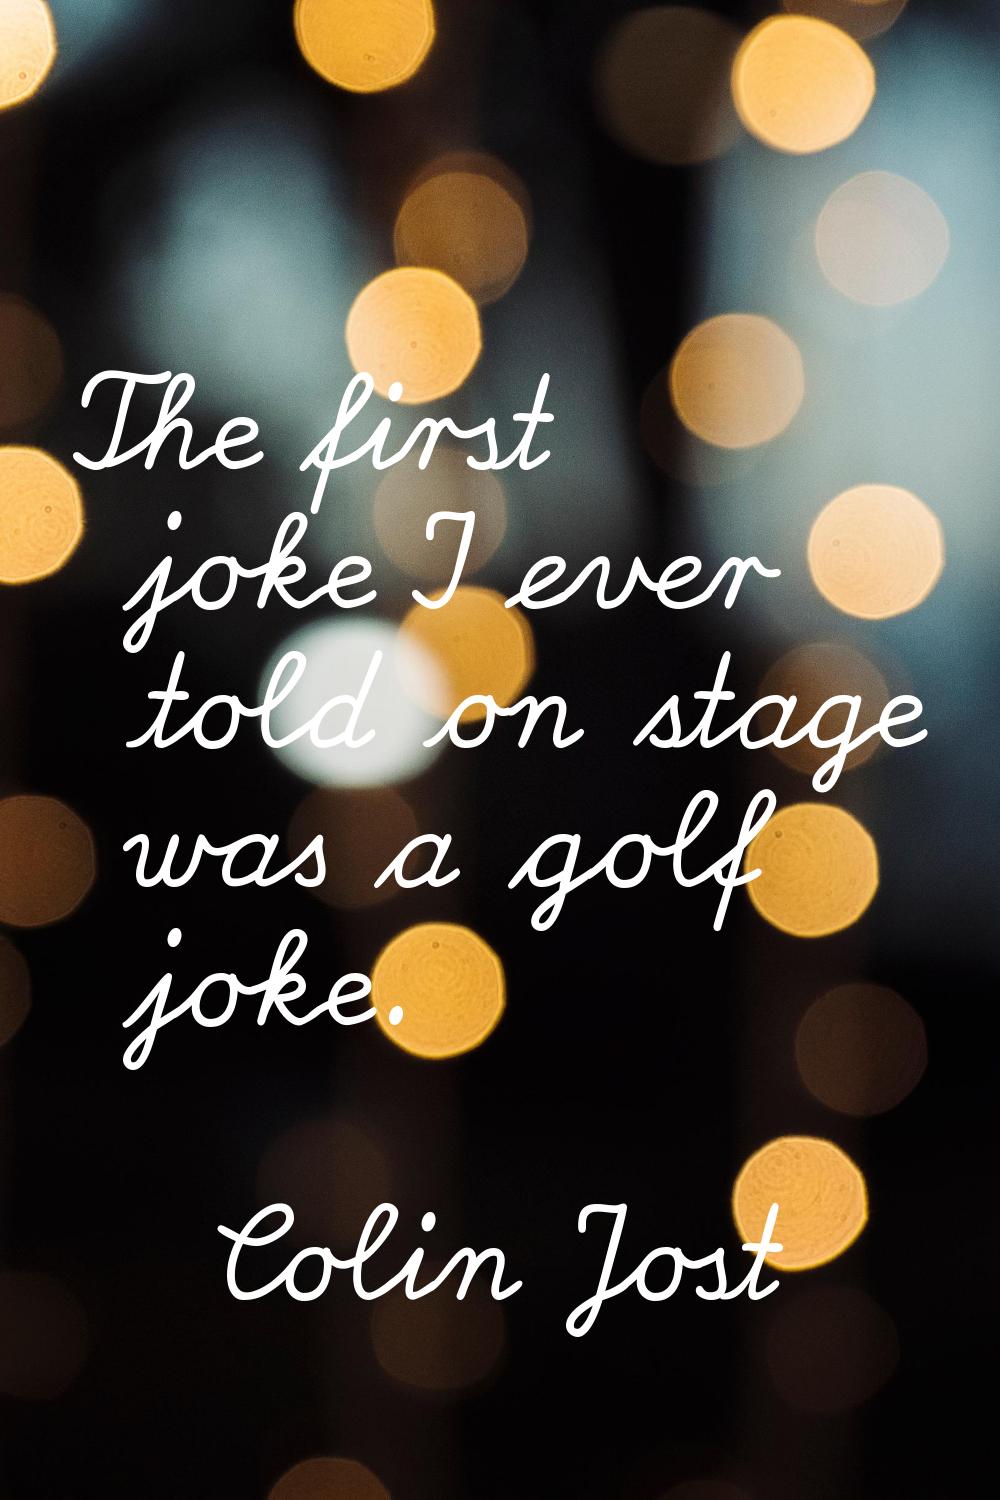 The first joke I ever told on stage was a golf joke.